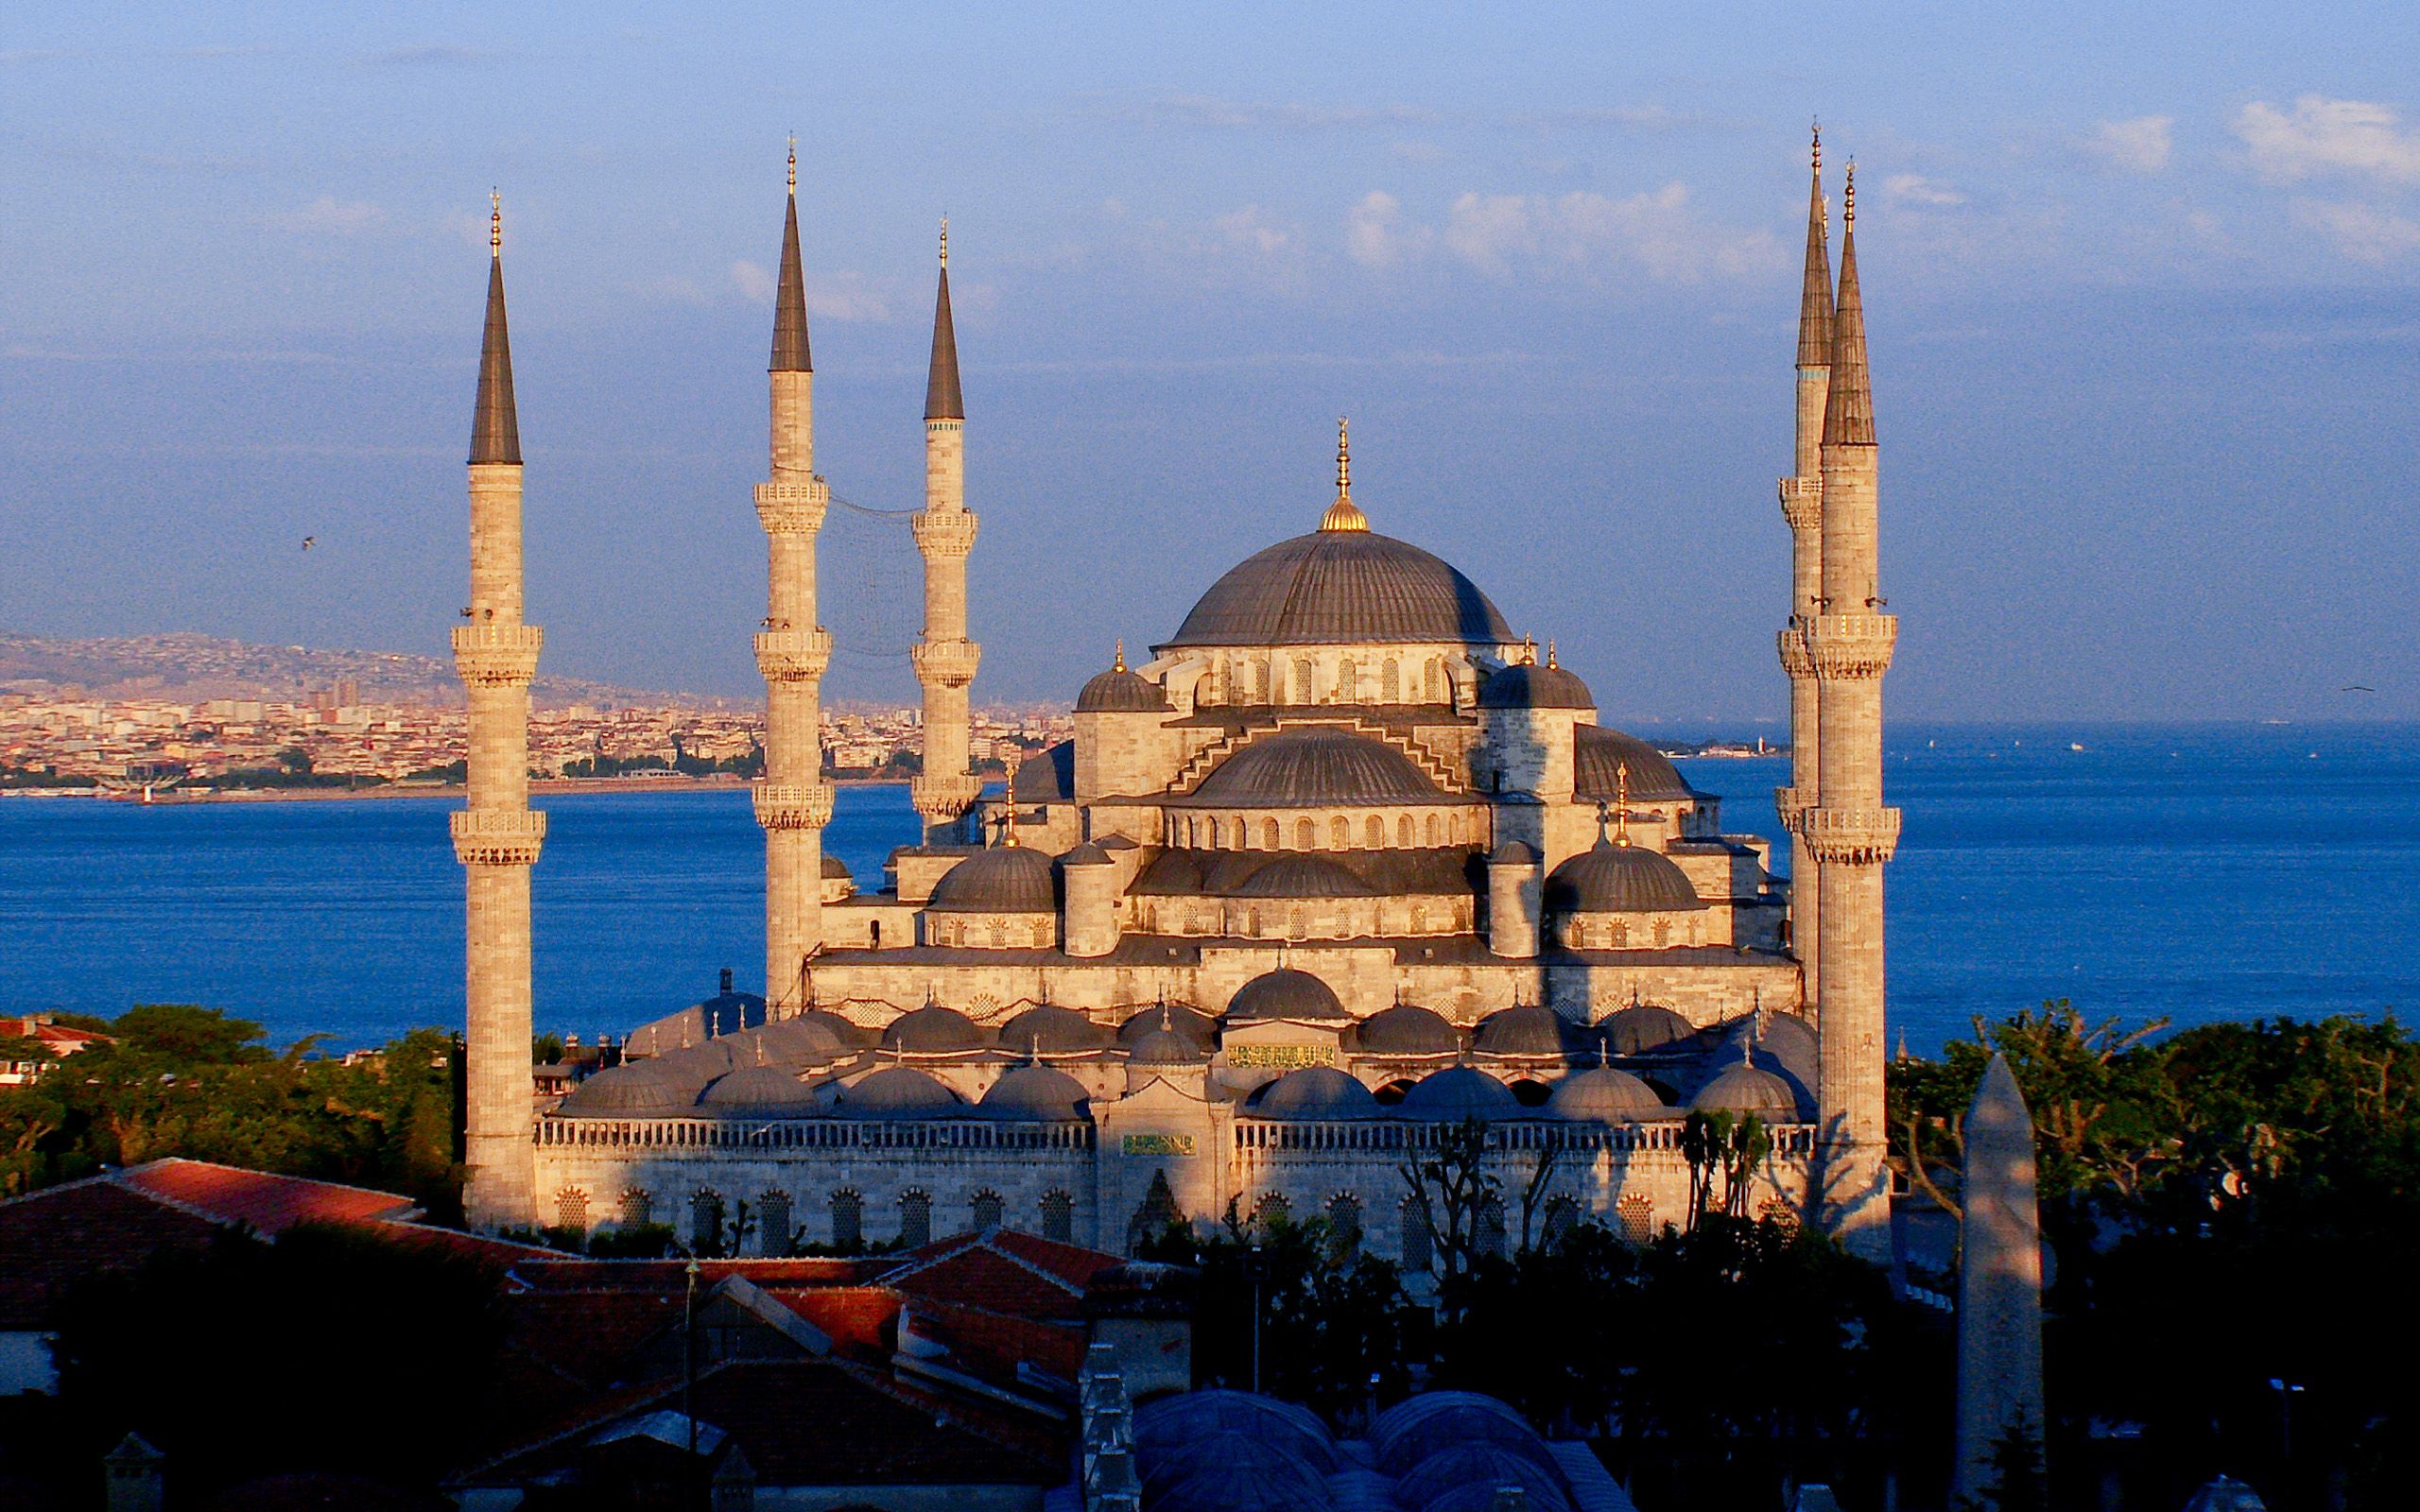 Blue Mosque Of Sultan Ahmed Mosque In Istanbul Turkey HD Wallpaper 2560x1600, Wallpaper13.com